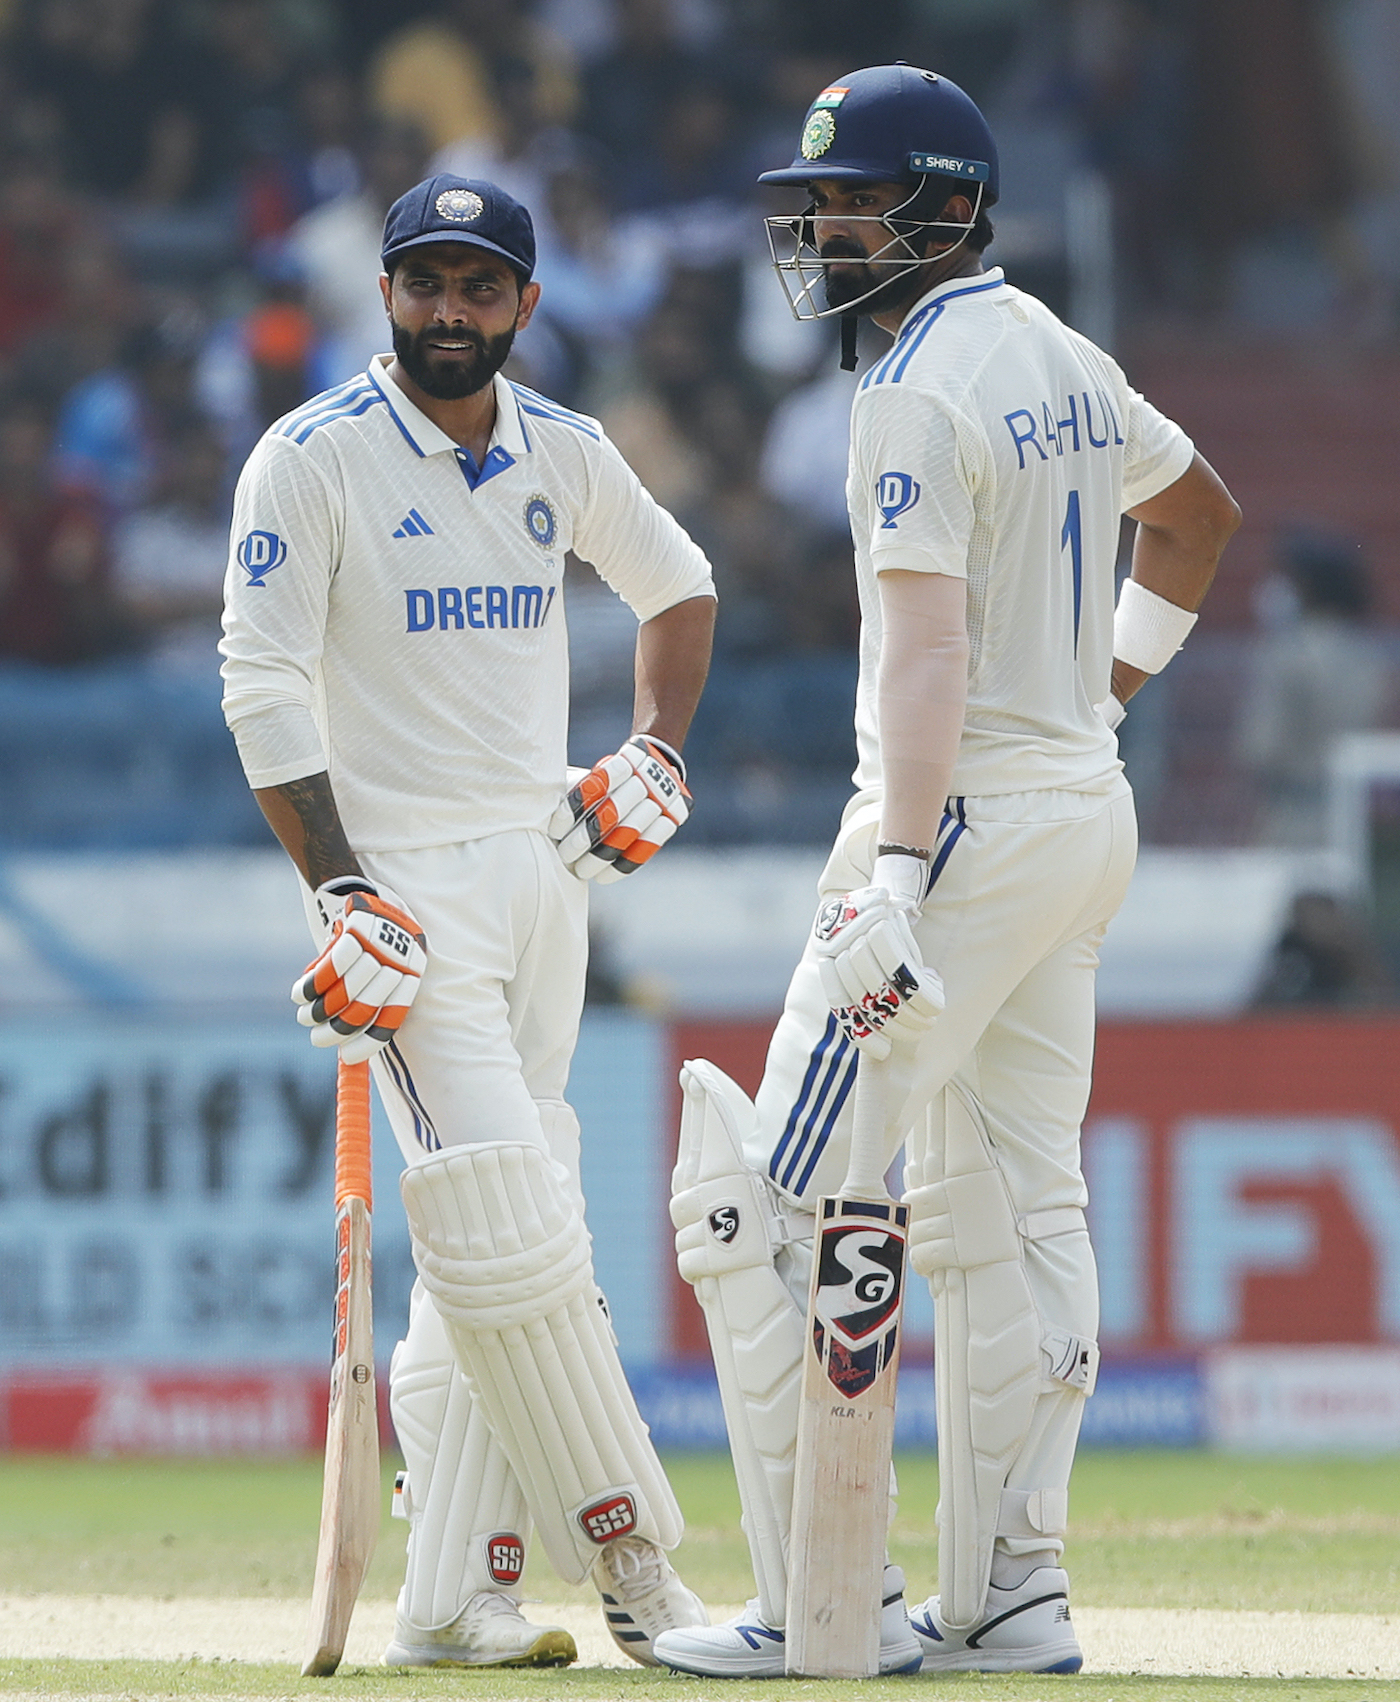 Rahul and Jadeja take the lead to push England against the wall